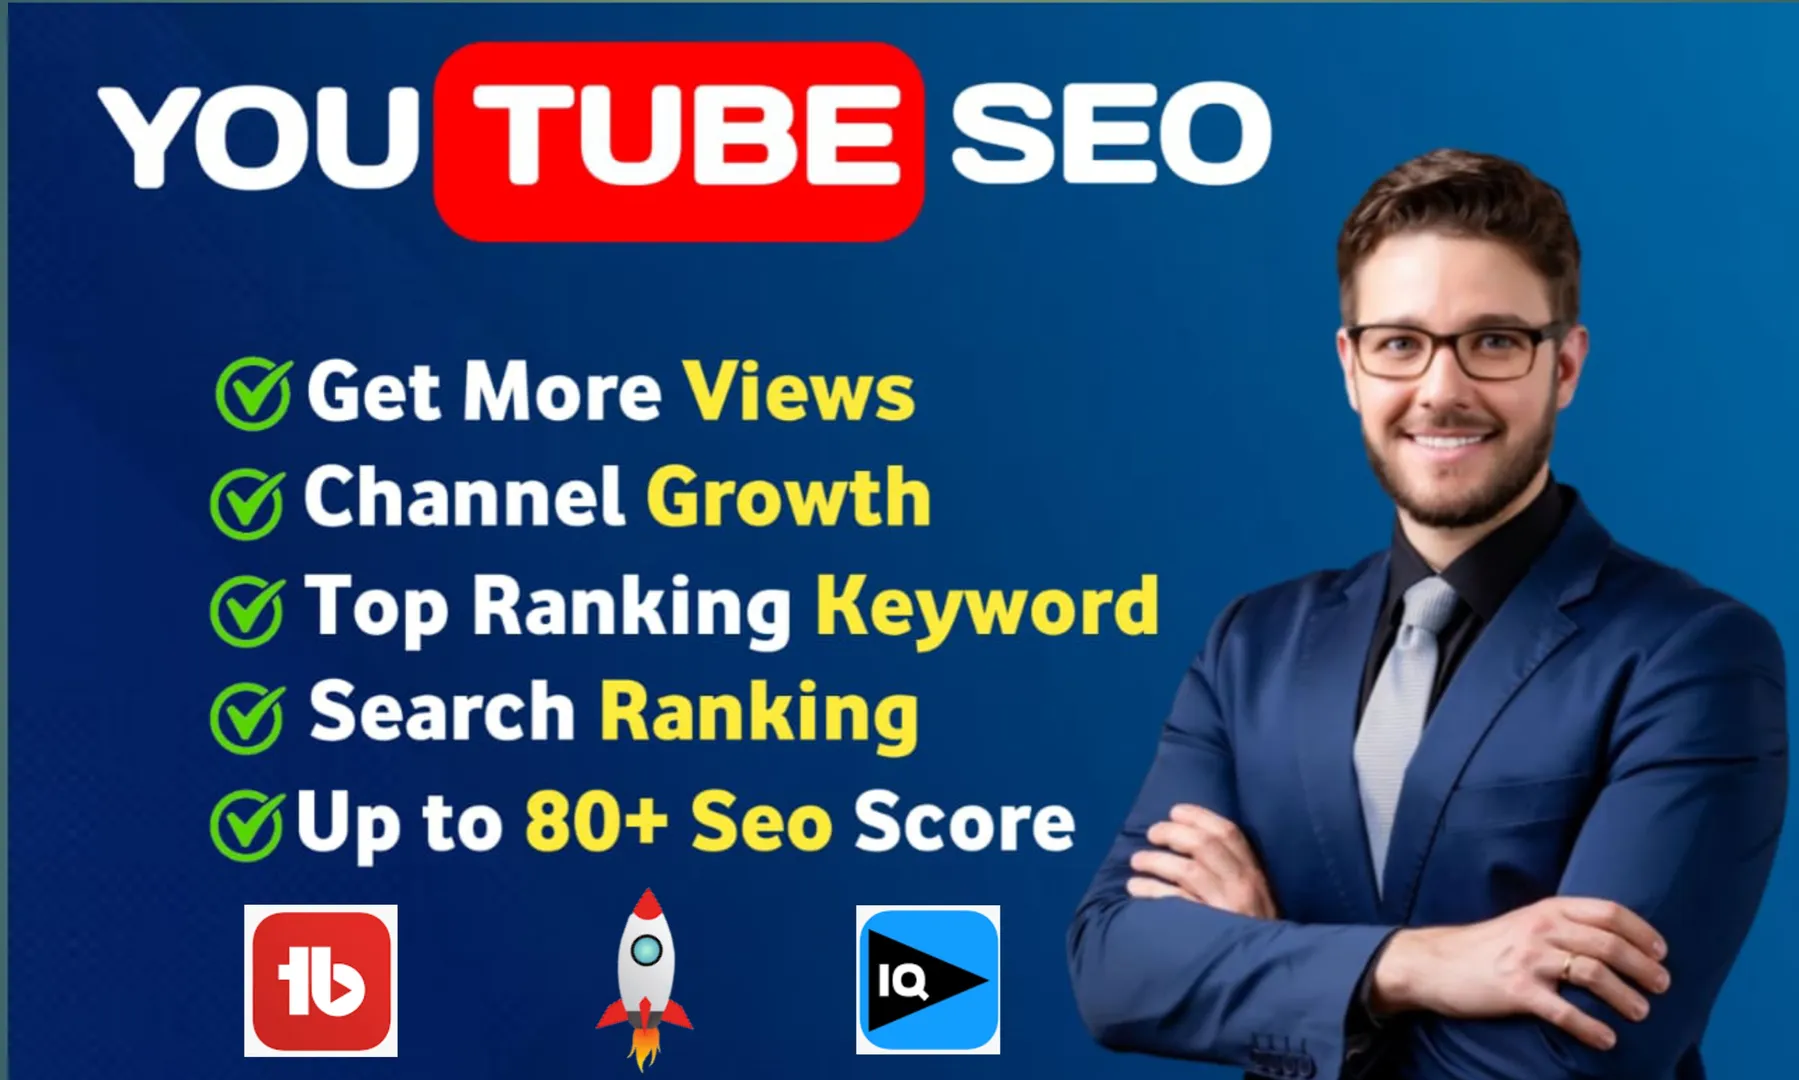 Greetings to you in our  youTube video SEO gig.

YouTube video SEO optimization service is very important for video ranking. It is not possible to rank without video SEO. It helps to reach your video globally.

Are you looking for someone to do video SEO for your channel, thereby there will be an increase in your video views organically? Then you have come to the right place.

I am a digital marketing Specialist.I have been working on this for the past five years. I will rank your video top ranking on YouTube search results through Best Keyword Research.

If you want to rank your video organic promotion and growth worldwide.

So, we are ready to give you the highest service about this.

My Video S.E.O Services: 

100% Organic Growth

Best Keyword Research

Top ranking Tags 

S.E.O Friendly Video Title 

Optimize Video Description & Metadata 

Add End Screen & Card 

Video S-E-0 Score 100% using Tubebuddy & 80+ by VIDIQ.

Video rating on the Top Page 

Niece Related hashtags

Playlists Add

Watermark Add 

Premiere Setup (If want) 

Default add settings (If want) 

More….

Why choose me? 

100% Organically Video S.EO

Get more Organic Views

Client Satisfaction 100% 

Quickly response 

Friendly Communication 

Free tips to grow your channel

I Need from You: 

Give me your channel access. 

Or Provide me as a Channel manager. 

Targeted Keywords for Video SEO

Before Placing the Order, Please Contact me.

Note: You have to wait 3 to 4 weeks to get full results as it is an organic method.

Thanks!